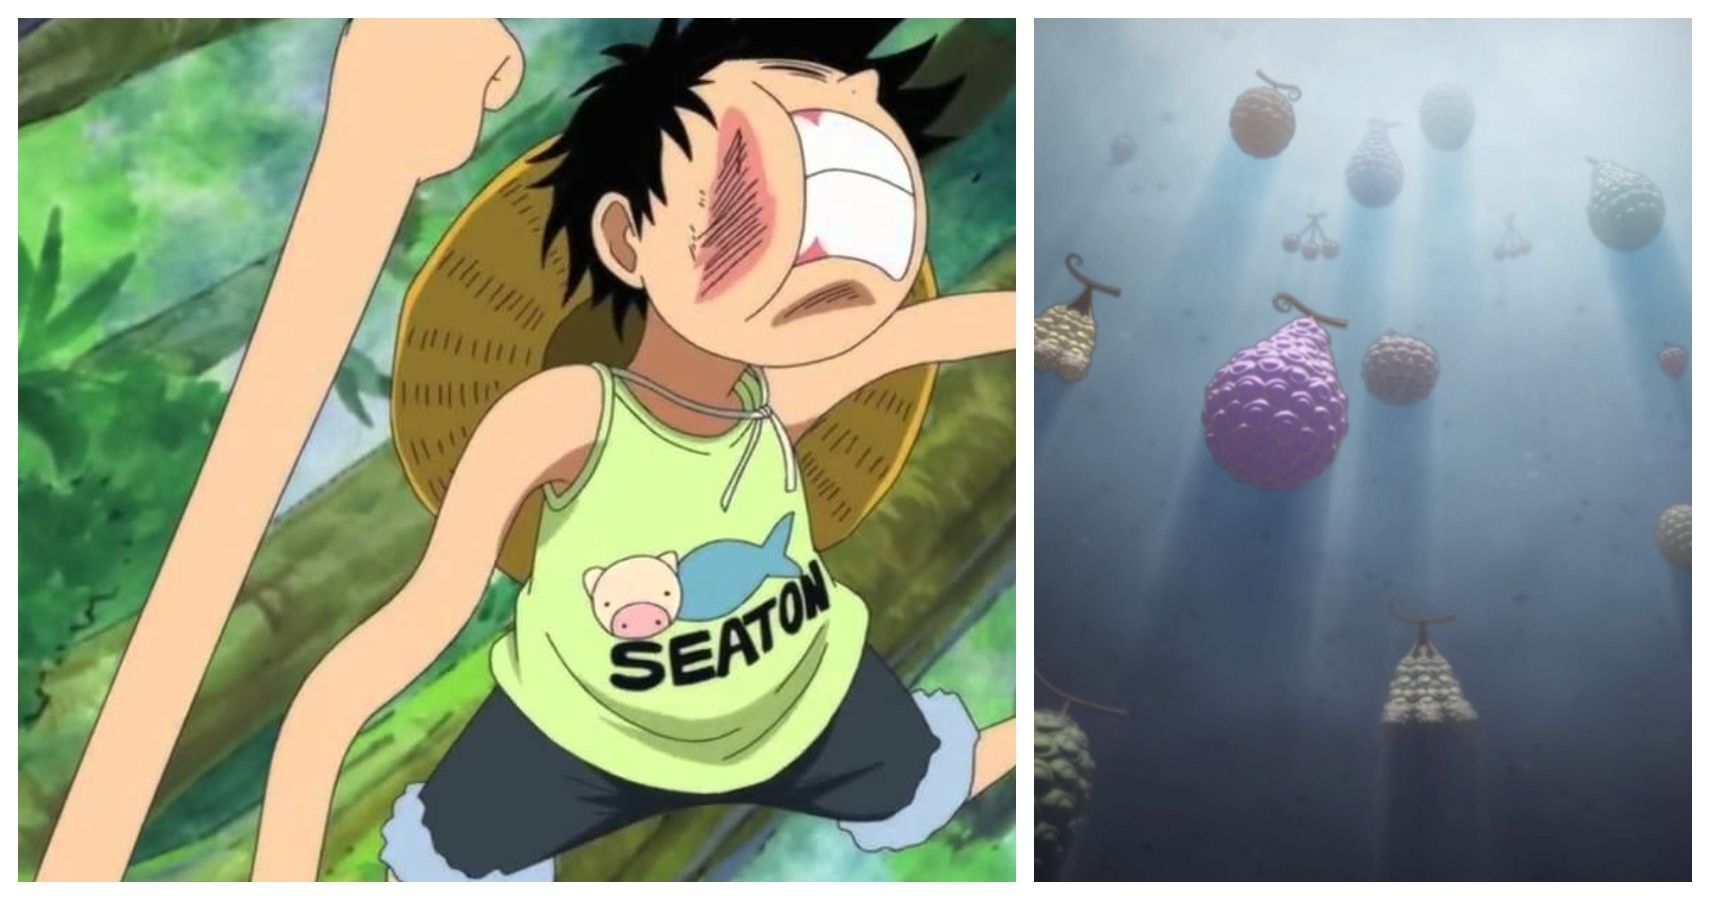 What if Luffy ate the Magu Magu no Mi fruit instead? : r/OnePiece